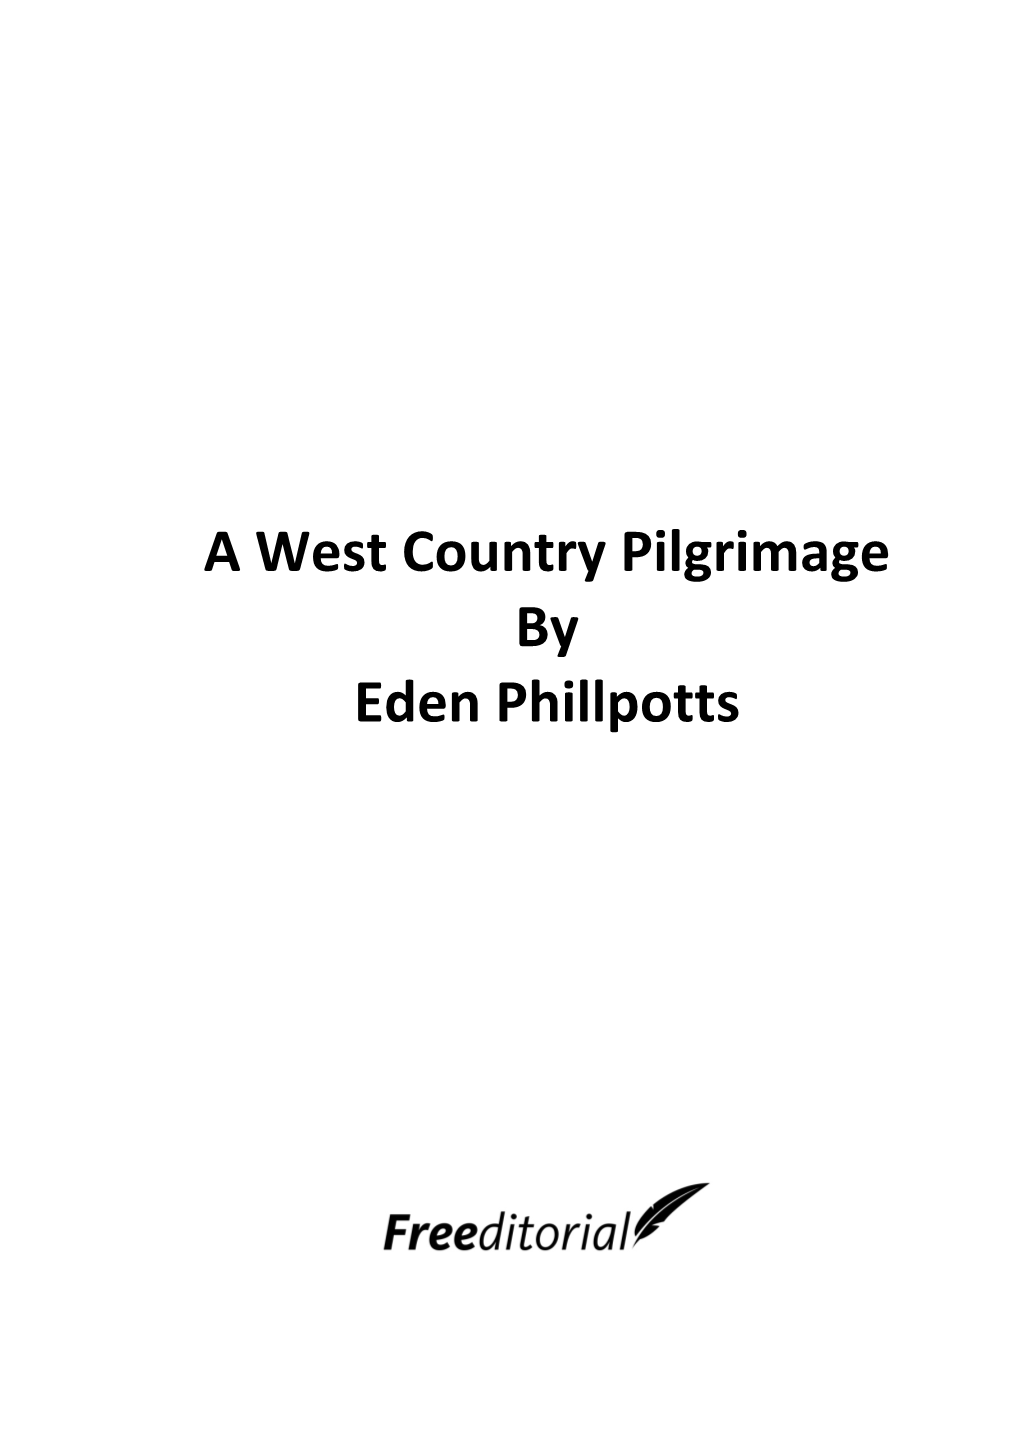 A West Country Pilgrimage by Eden Phillpotts